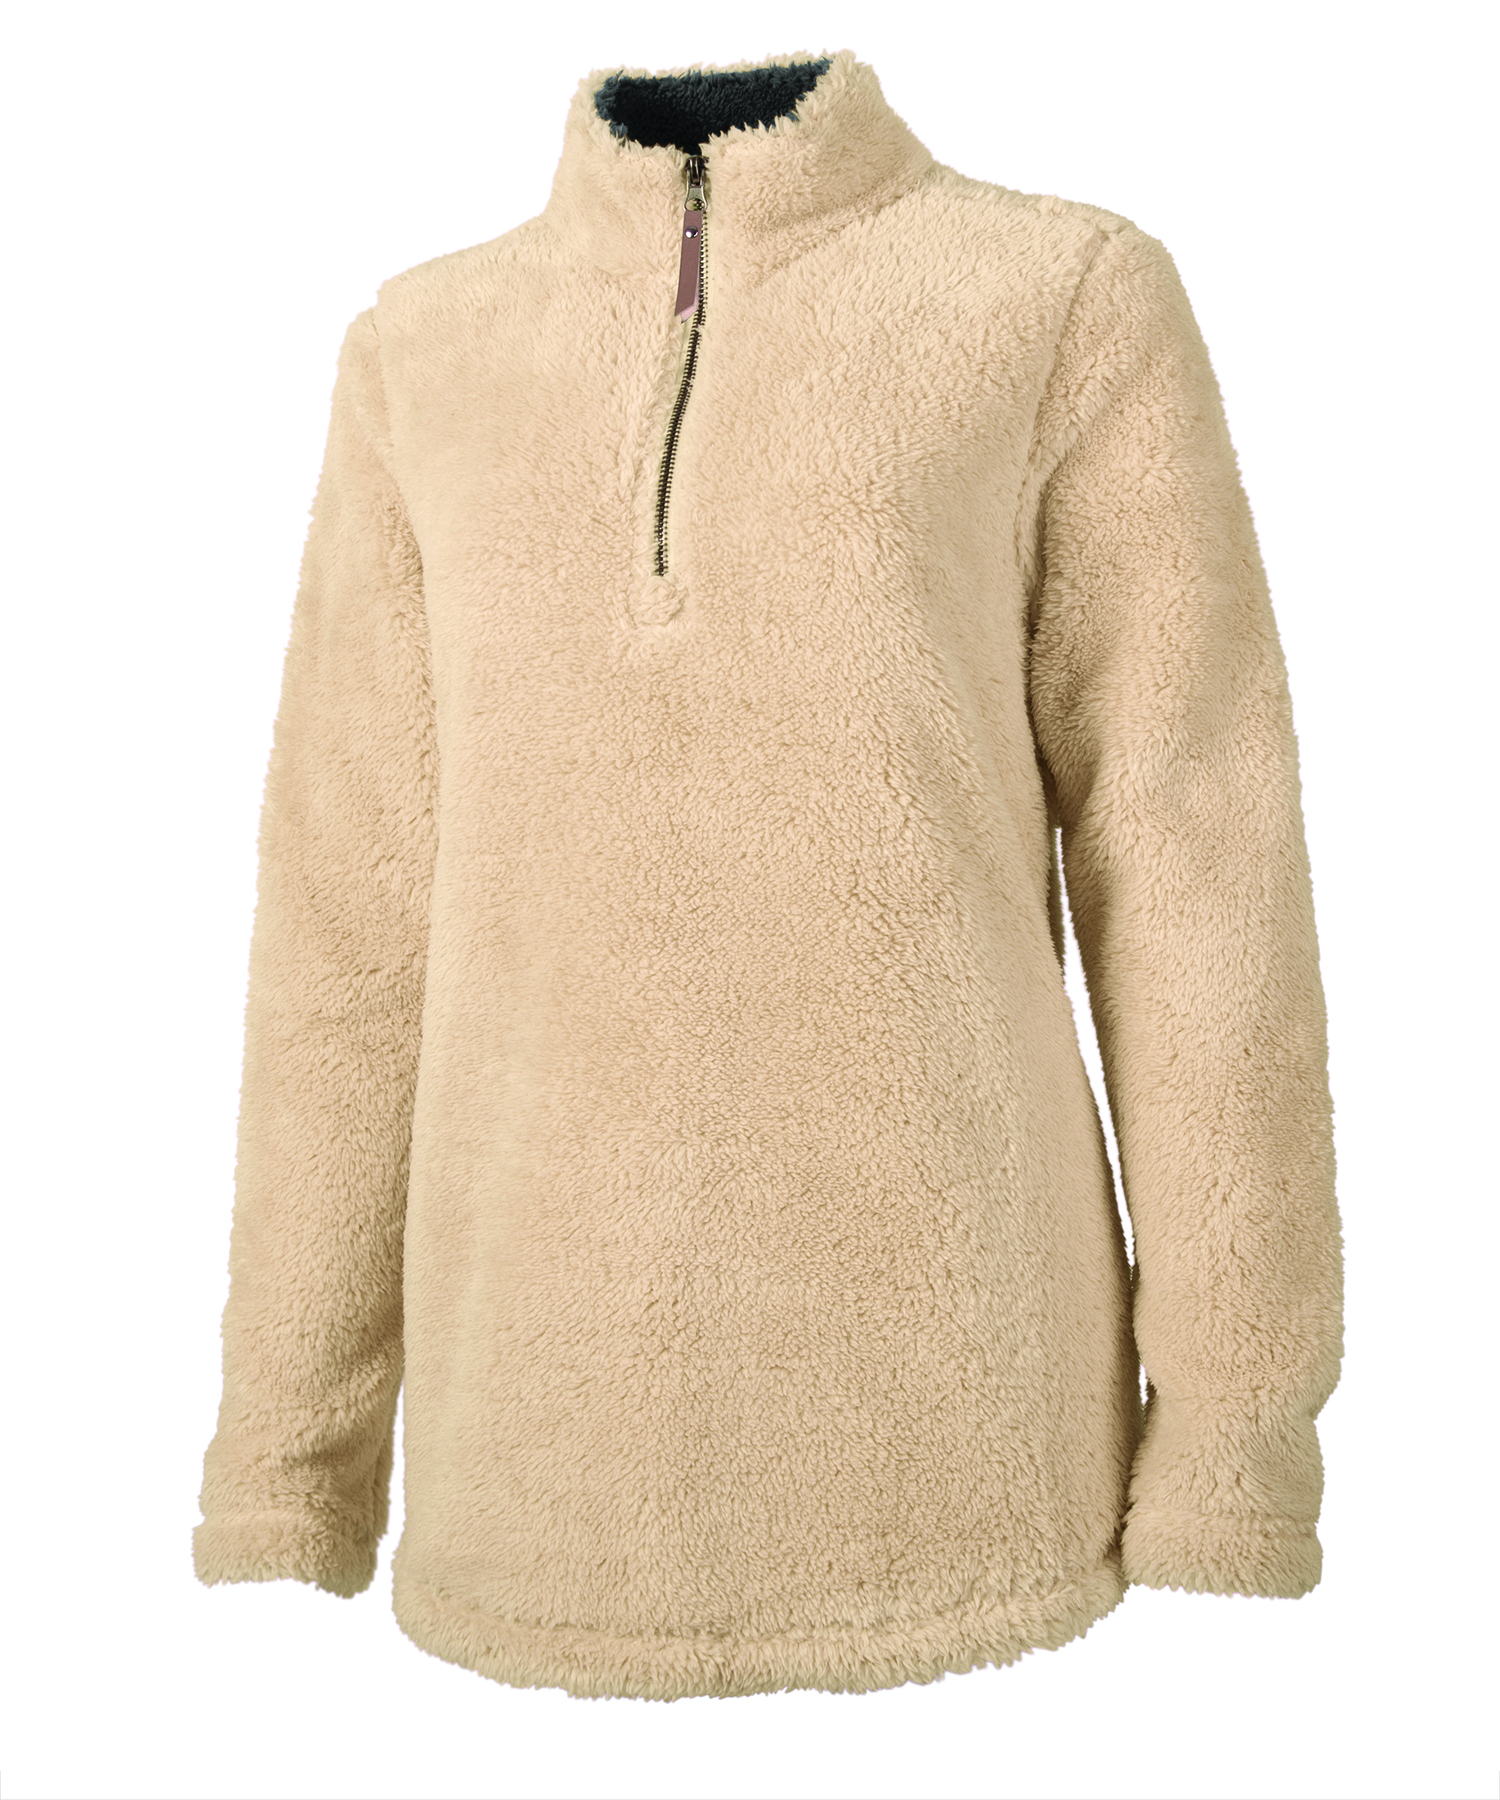 Charles River Apparel Women’s Newport Fleece Pullover Style 5876 Front Sand